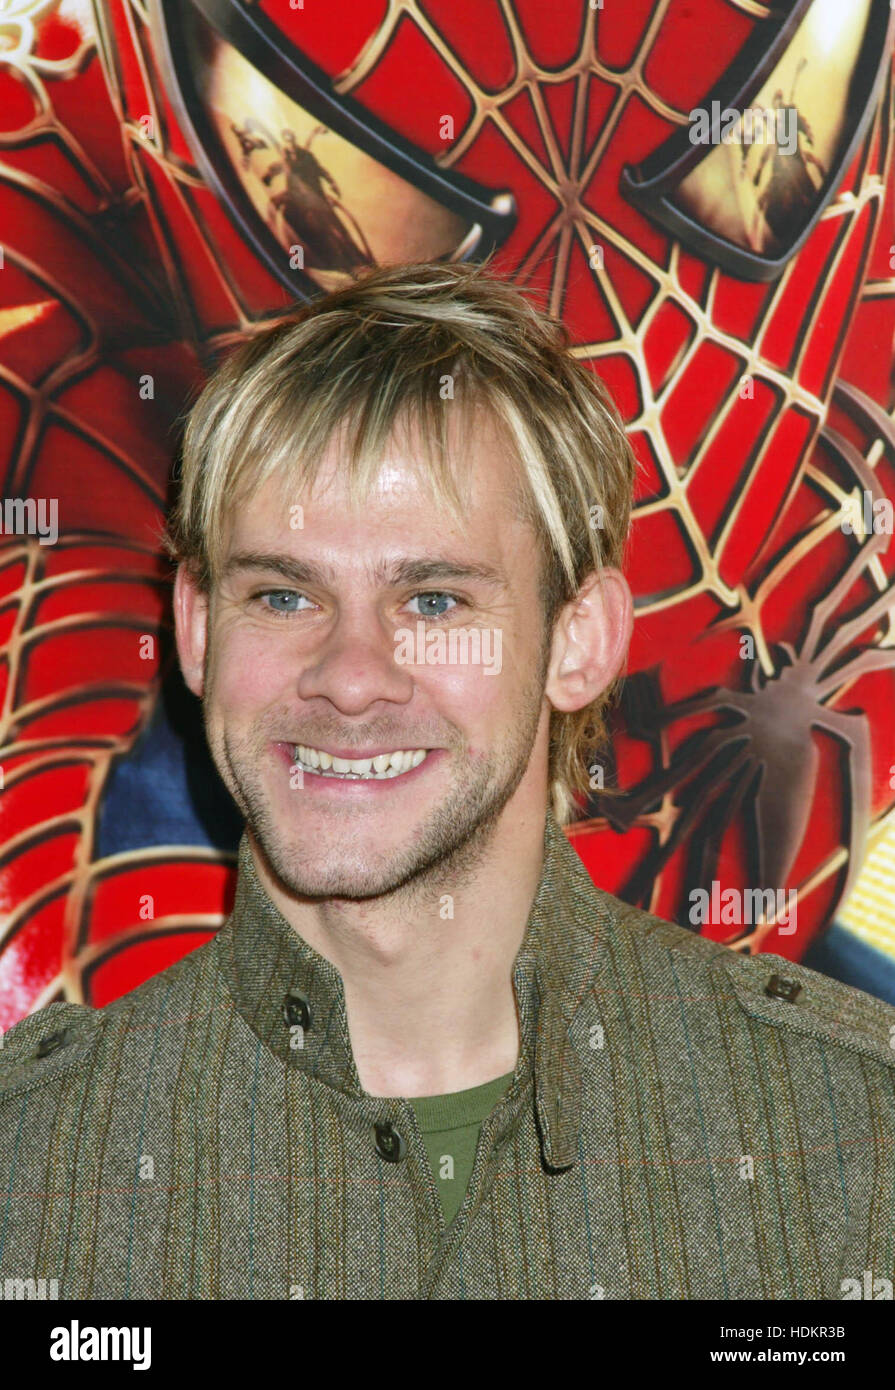 Actor Dominic Monaghan at the premiere of the film, "Spider-man 2" at the Mann Village theatre in the Westwood section of Los Angeles on Tuesday 22 June 2004. Photo credit: Francis Specker Stock Photo